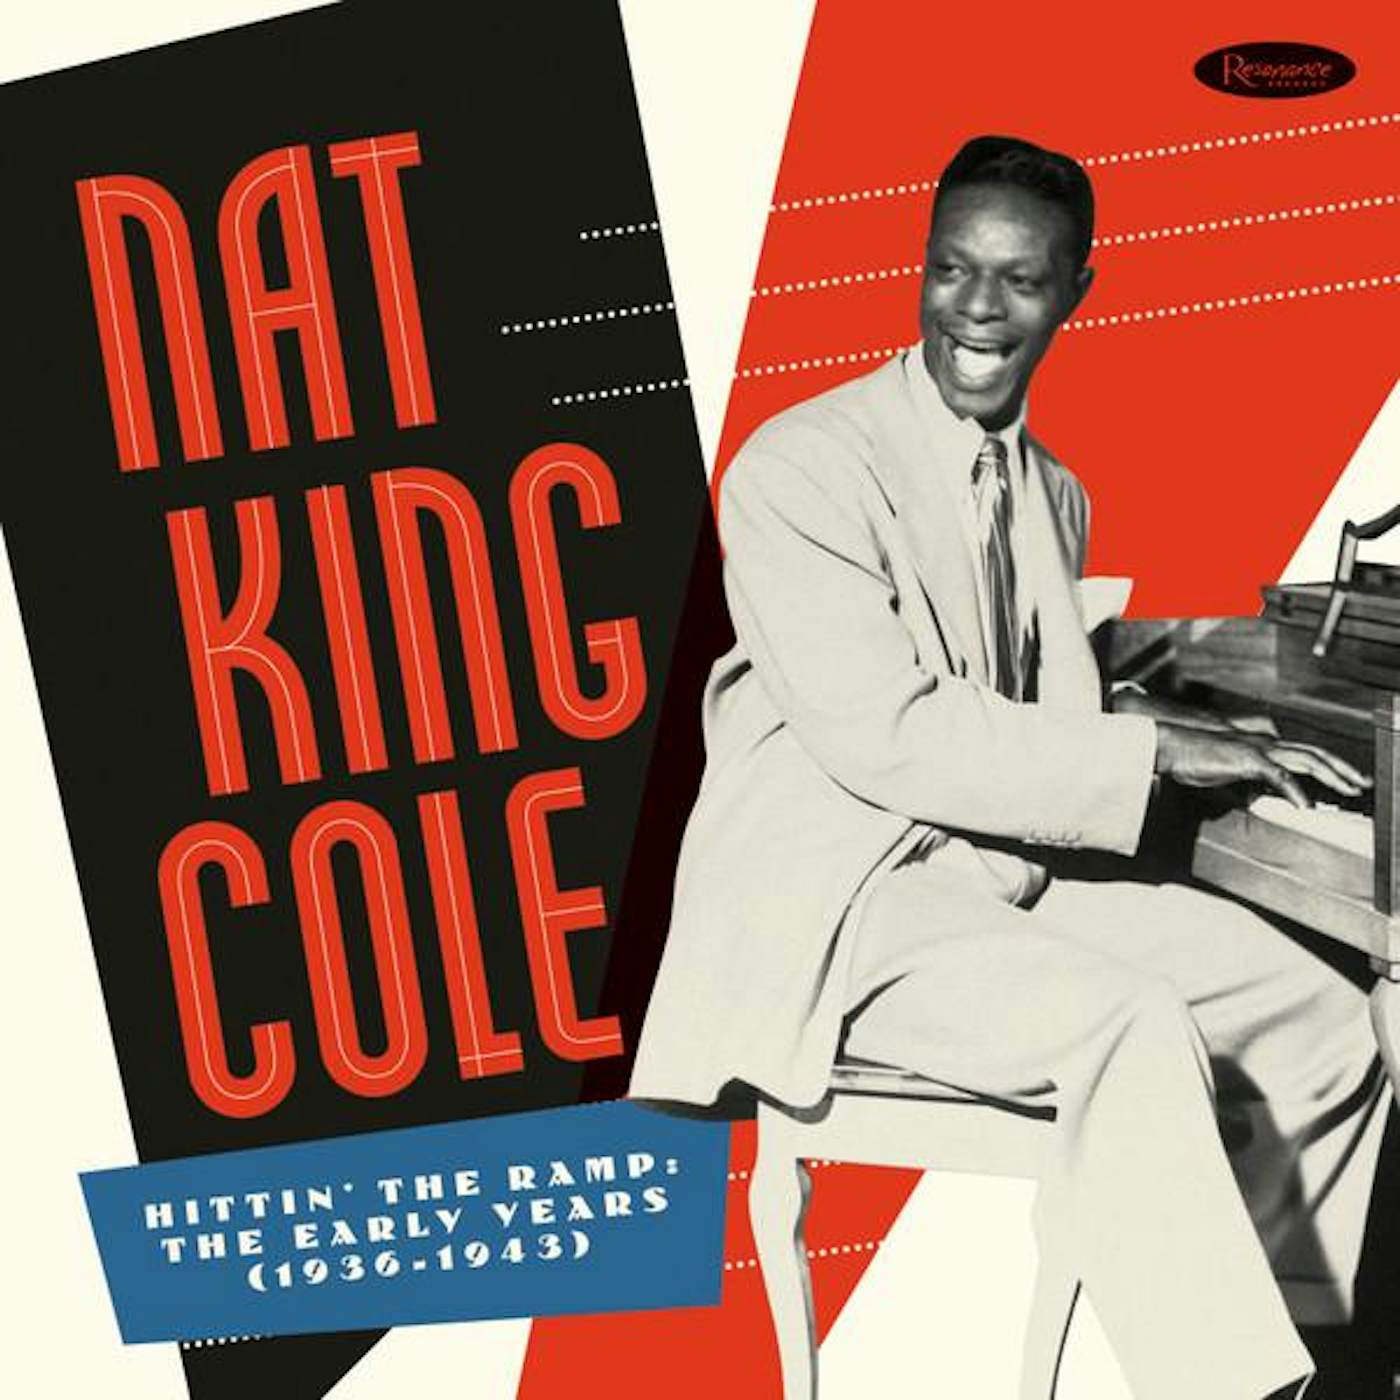 Nat King Cole Hittin The Ramp: The Early Years 1936-1943 (10LP) Vinyl Record